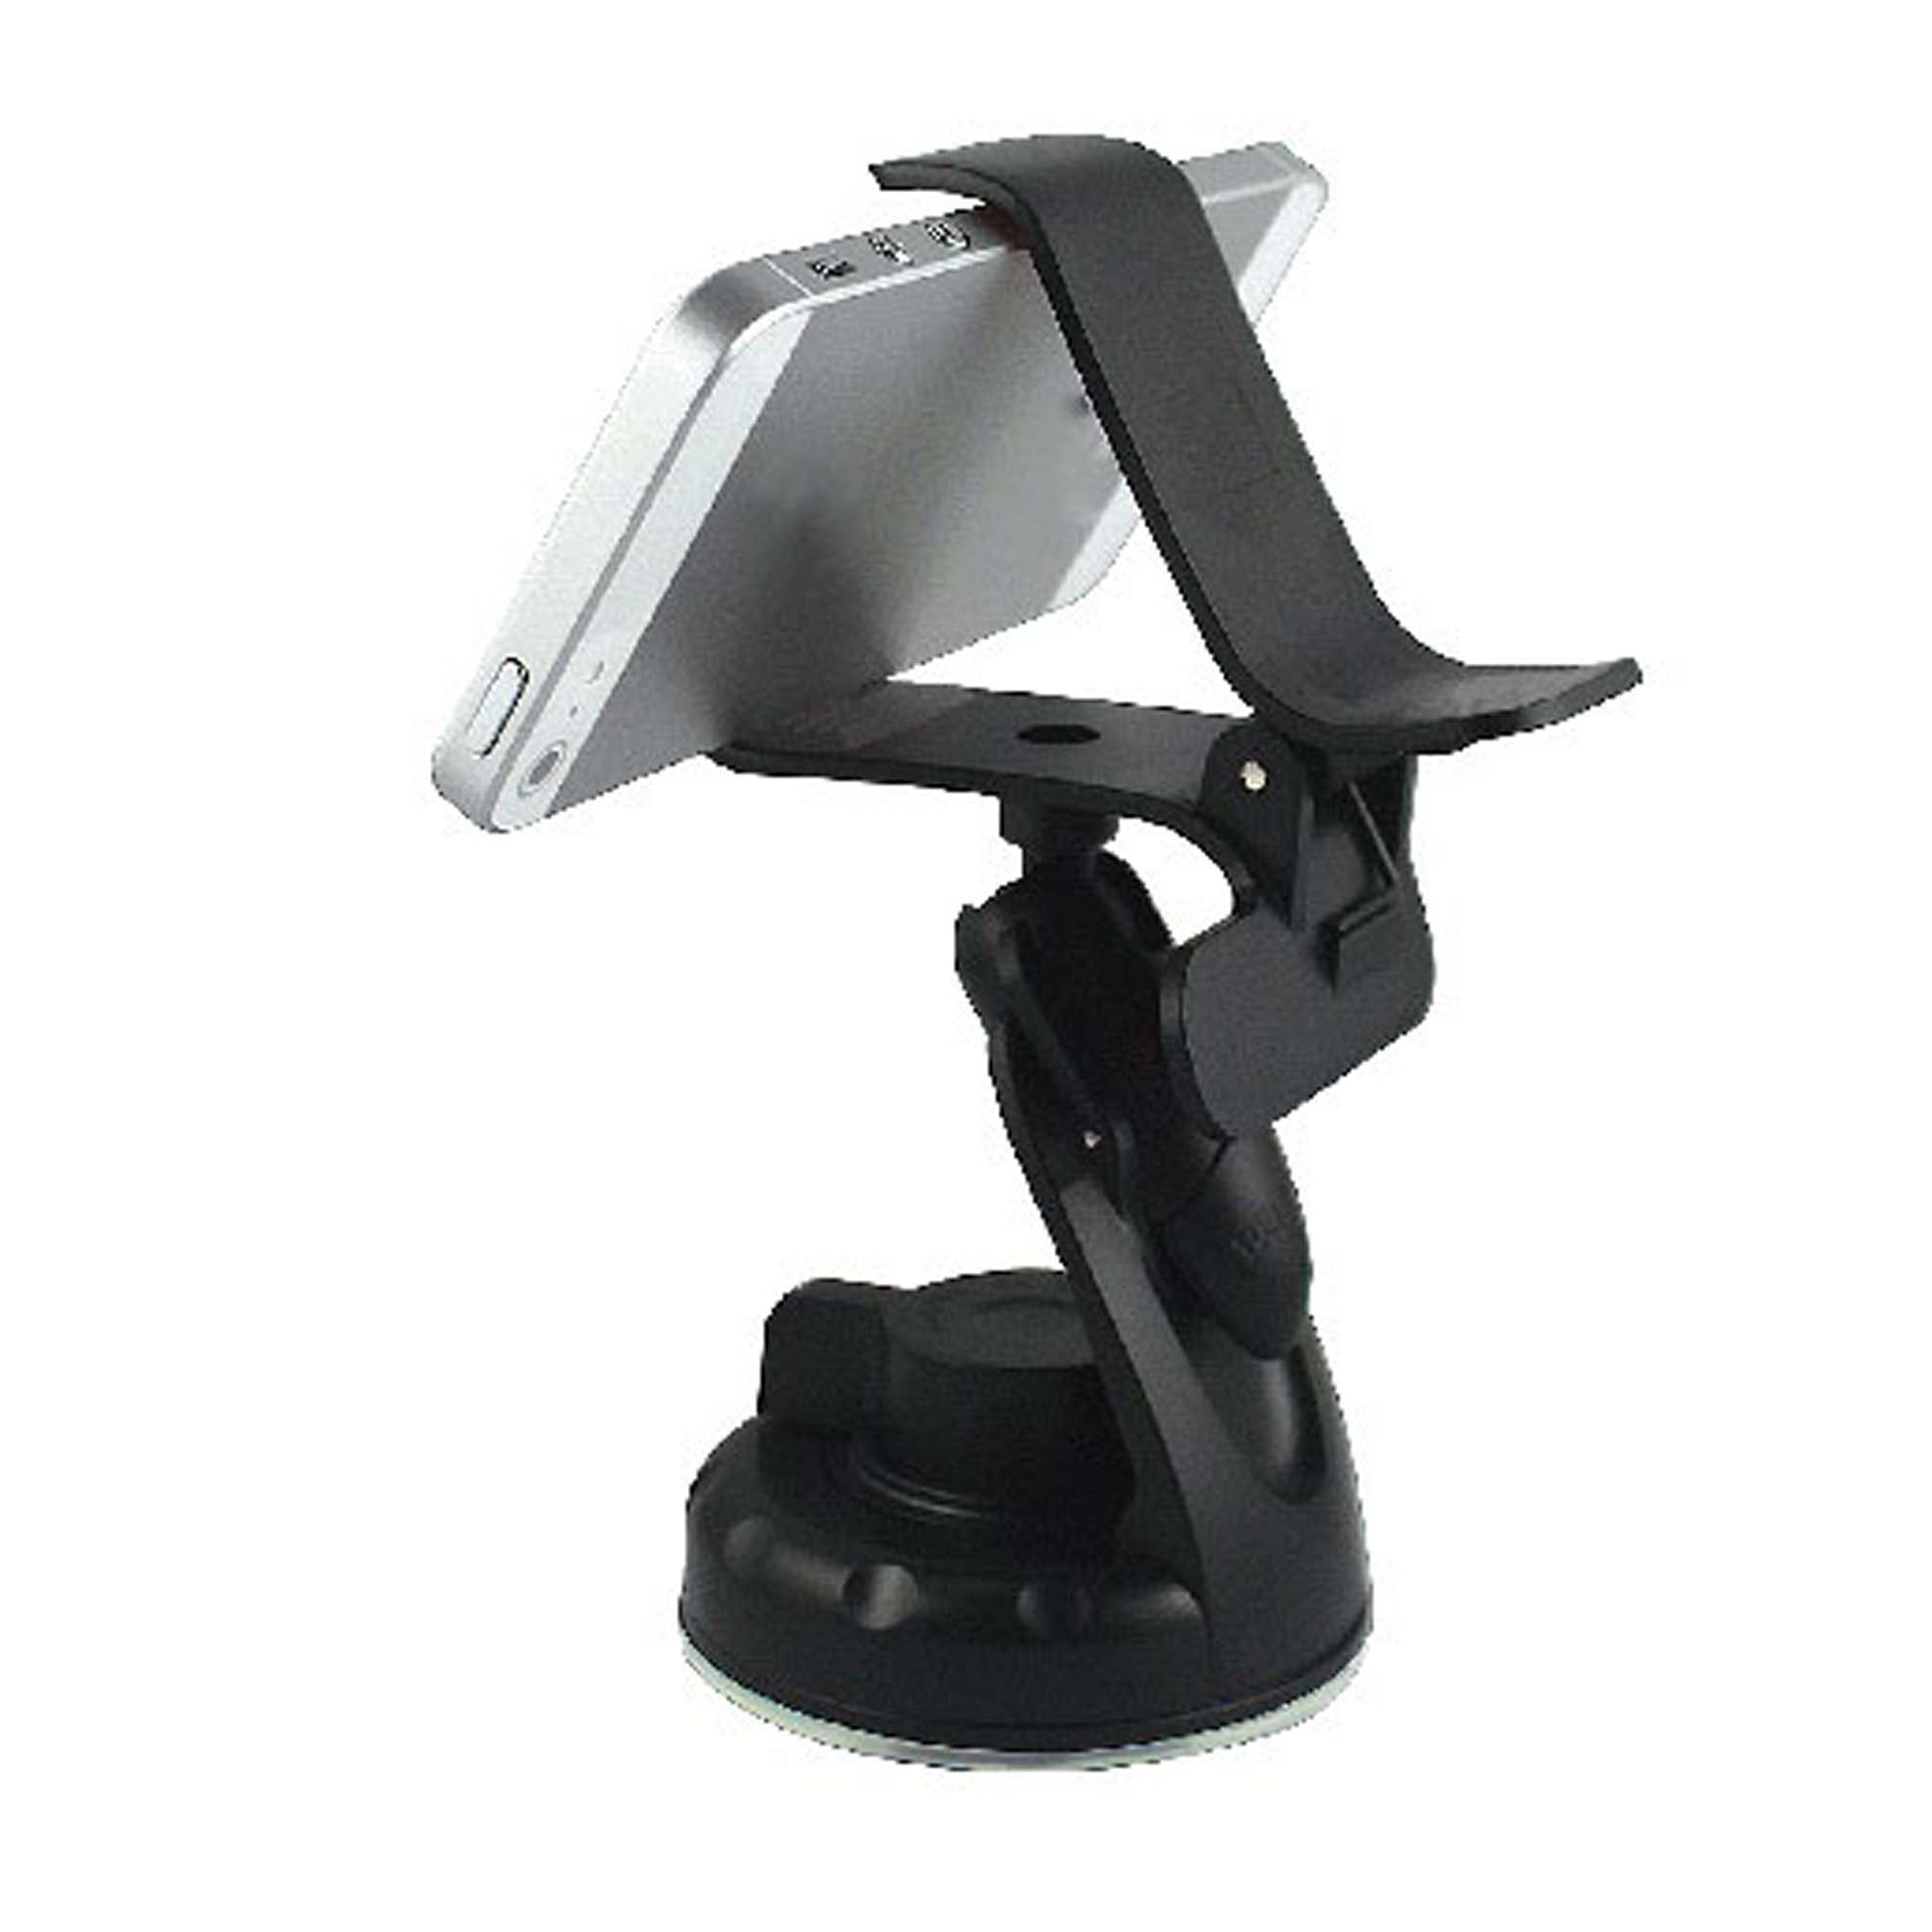 INLAND PRODUCTS ProHT Universal Car Mount Holder for Cellphones and GPS 05307